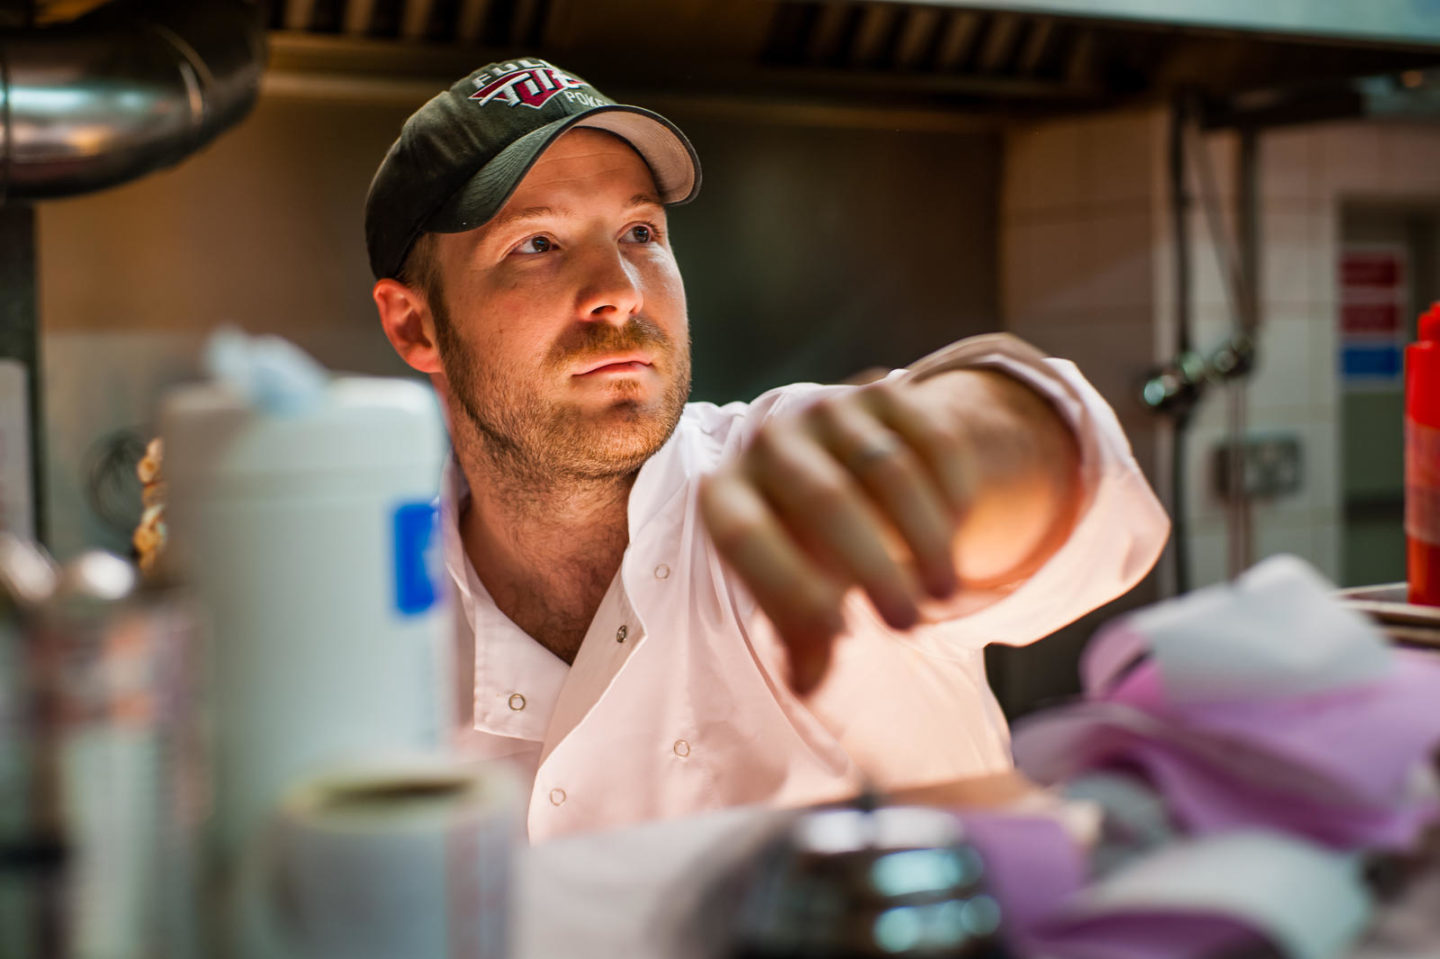 NEIL RANKIN: “PEOPLE HAVE LOST THEIR PASSION FOR COOKING FOOD”